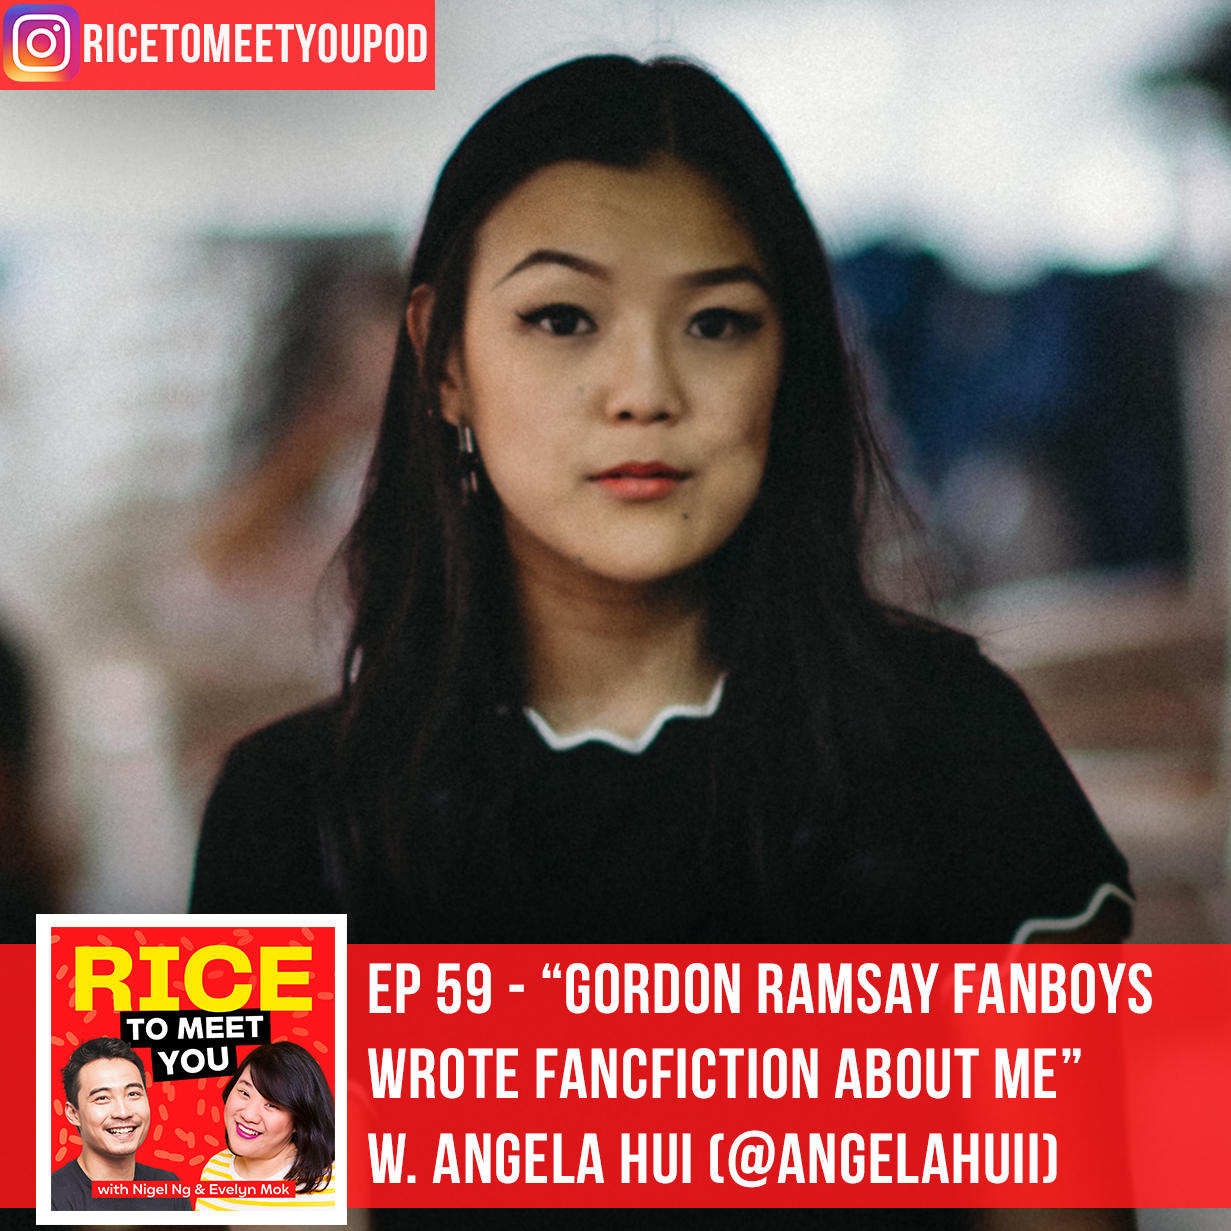 Gordon Ramsay Fanboys Wrote Fan Fiction about Me - ft. Angela Hui (VICE)